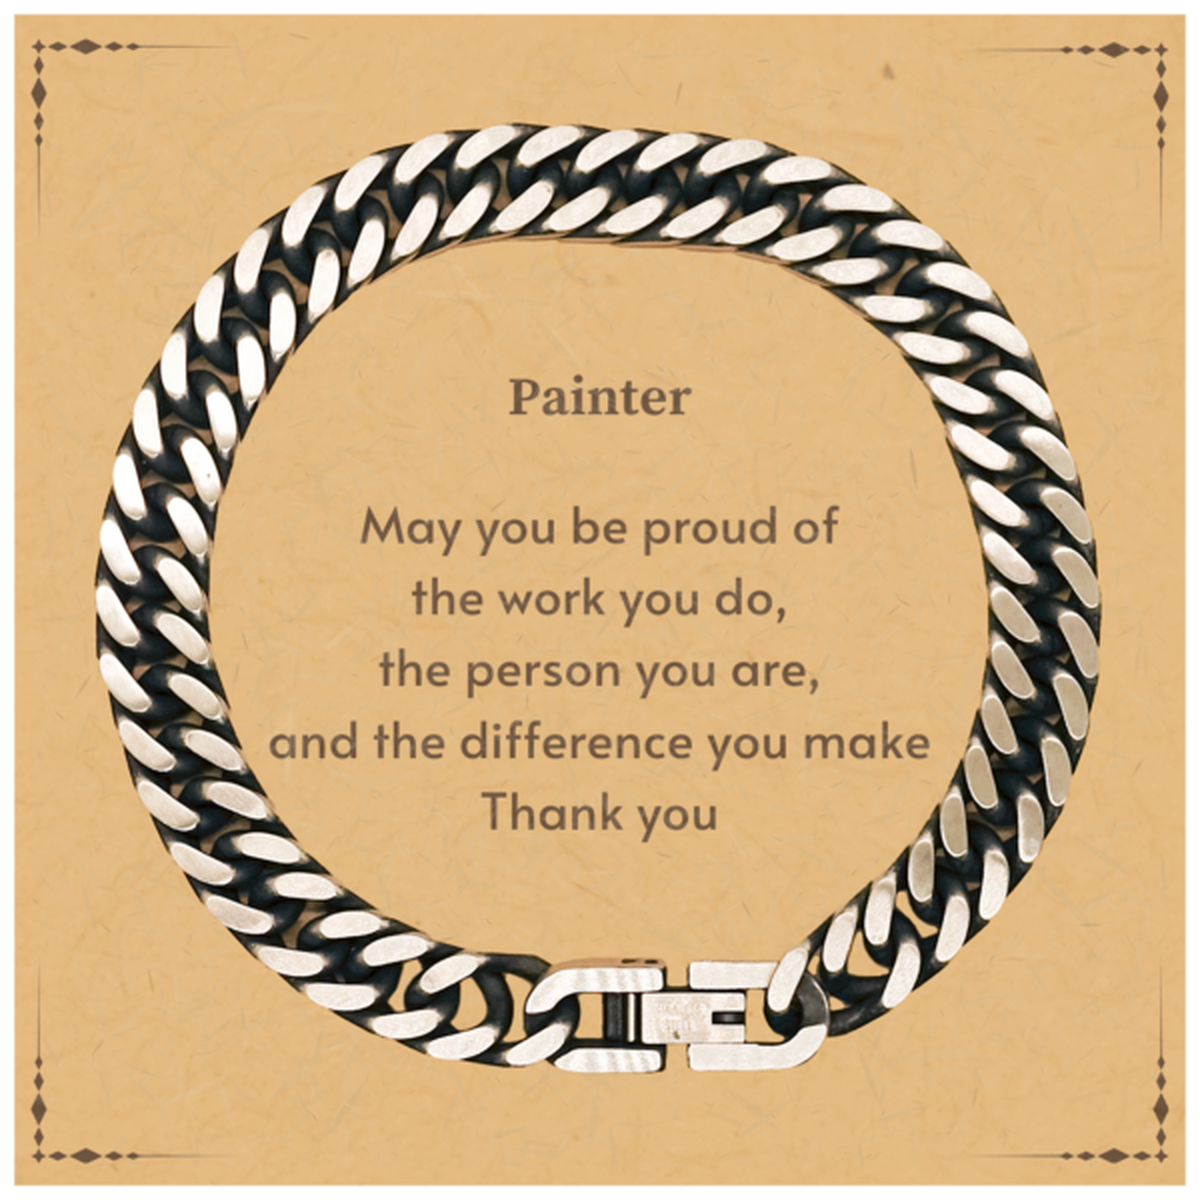 Heartwarming Cuban Link Chain Bracelet Retirement Coworkers Gifts for Painter, Painter May You be proud of the work you do, the person you are Gifts for Boss Men Women Friends